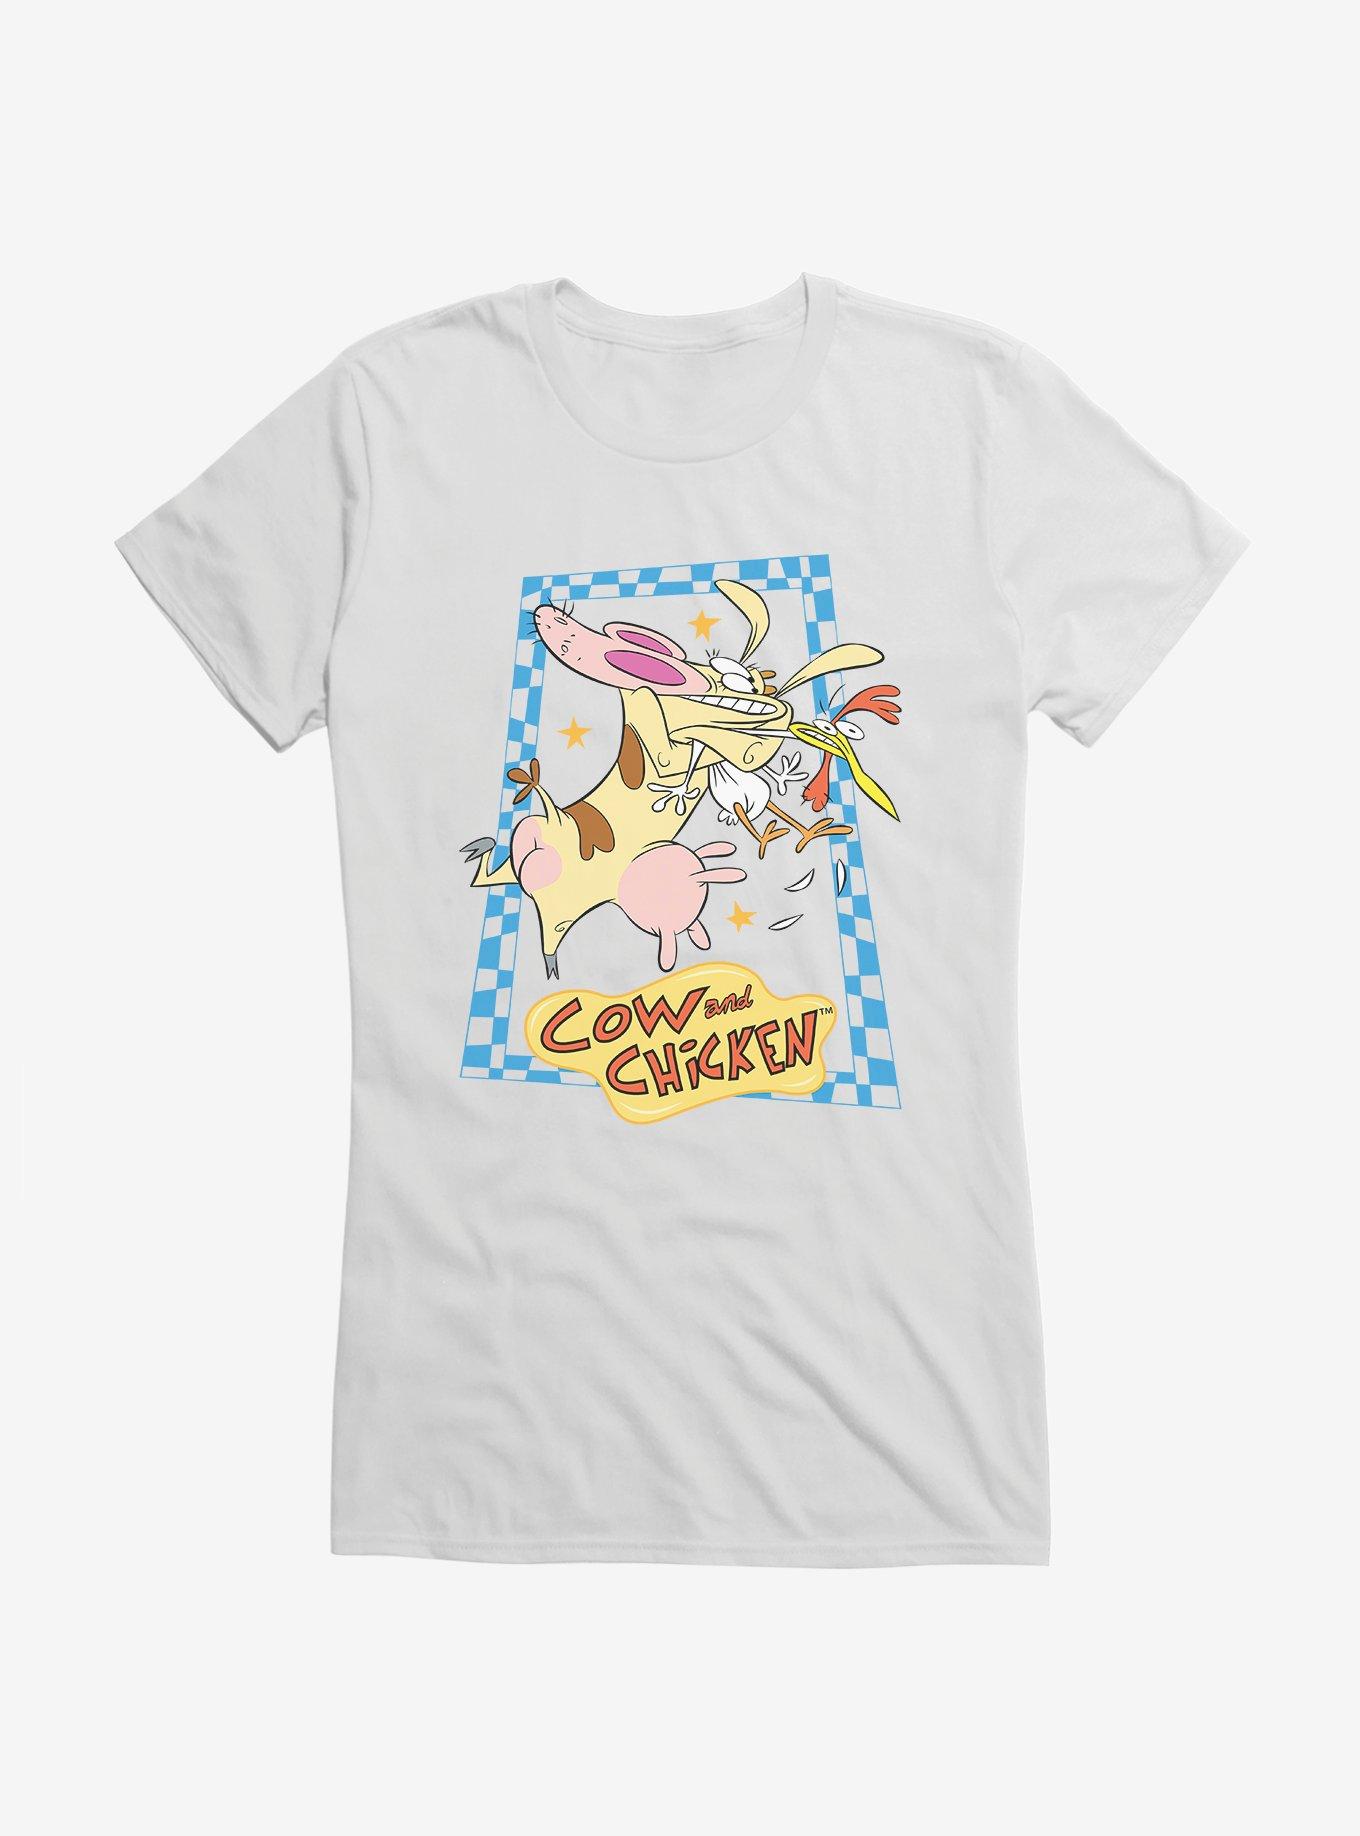 Cartoon Network Cow And Chicken Squeeze Girls T-Shirt, WHITE, hi-res